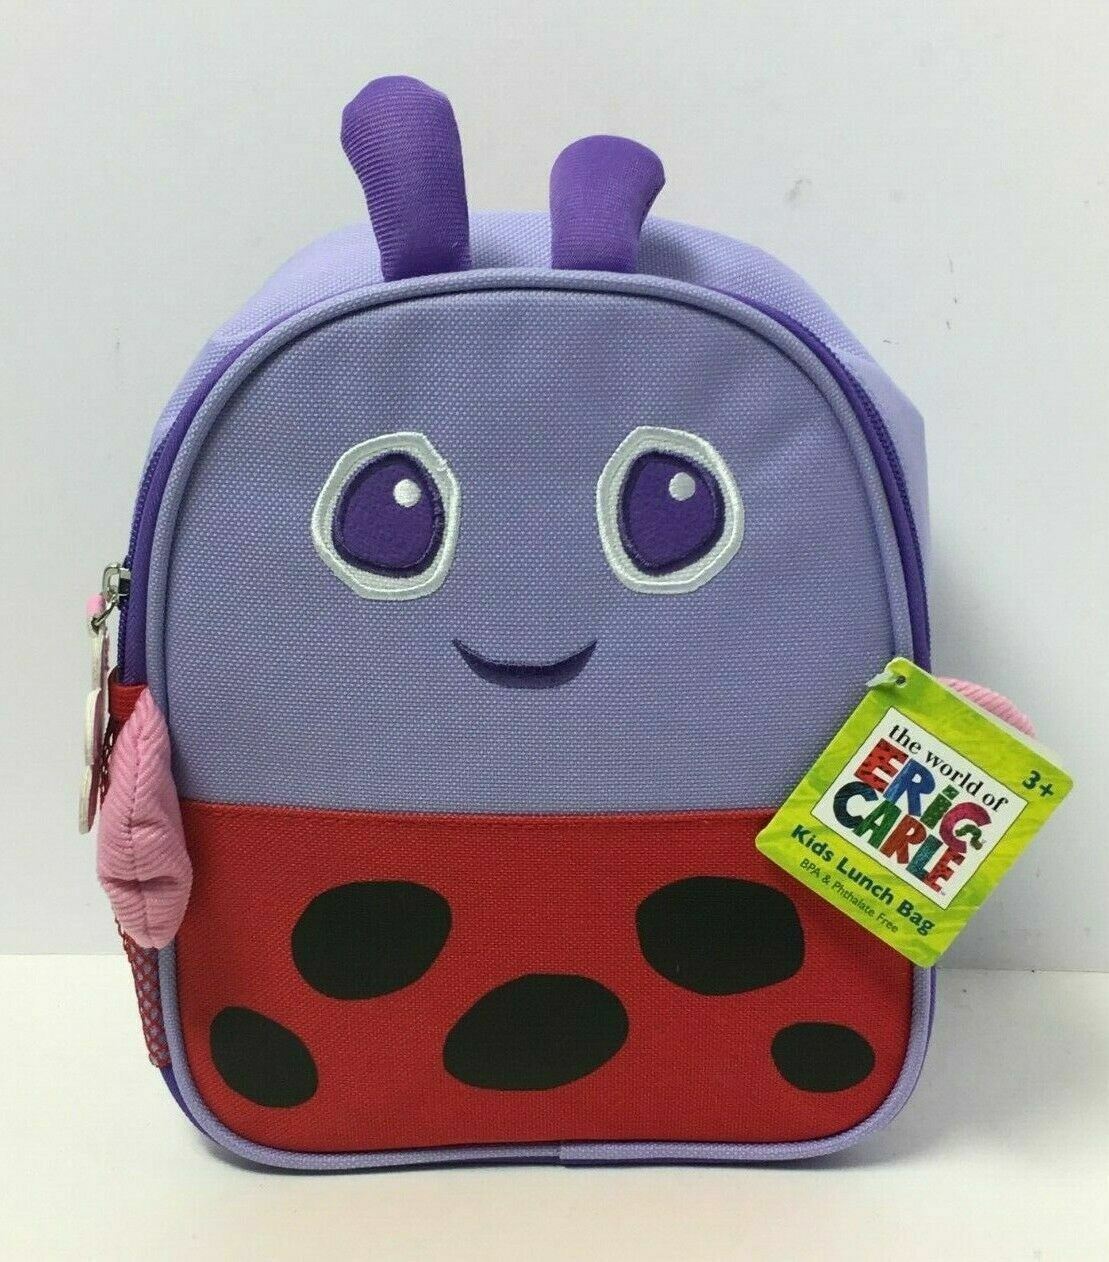 Primary image for KIDS PREFERRED THE WORLD OF ERIC CARLE THE GROUCHY LADYBUG LUNCH BAG